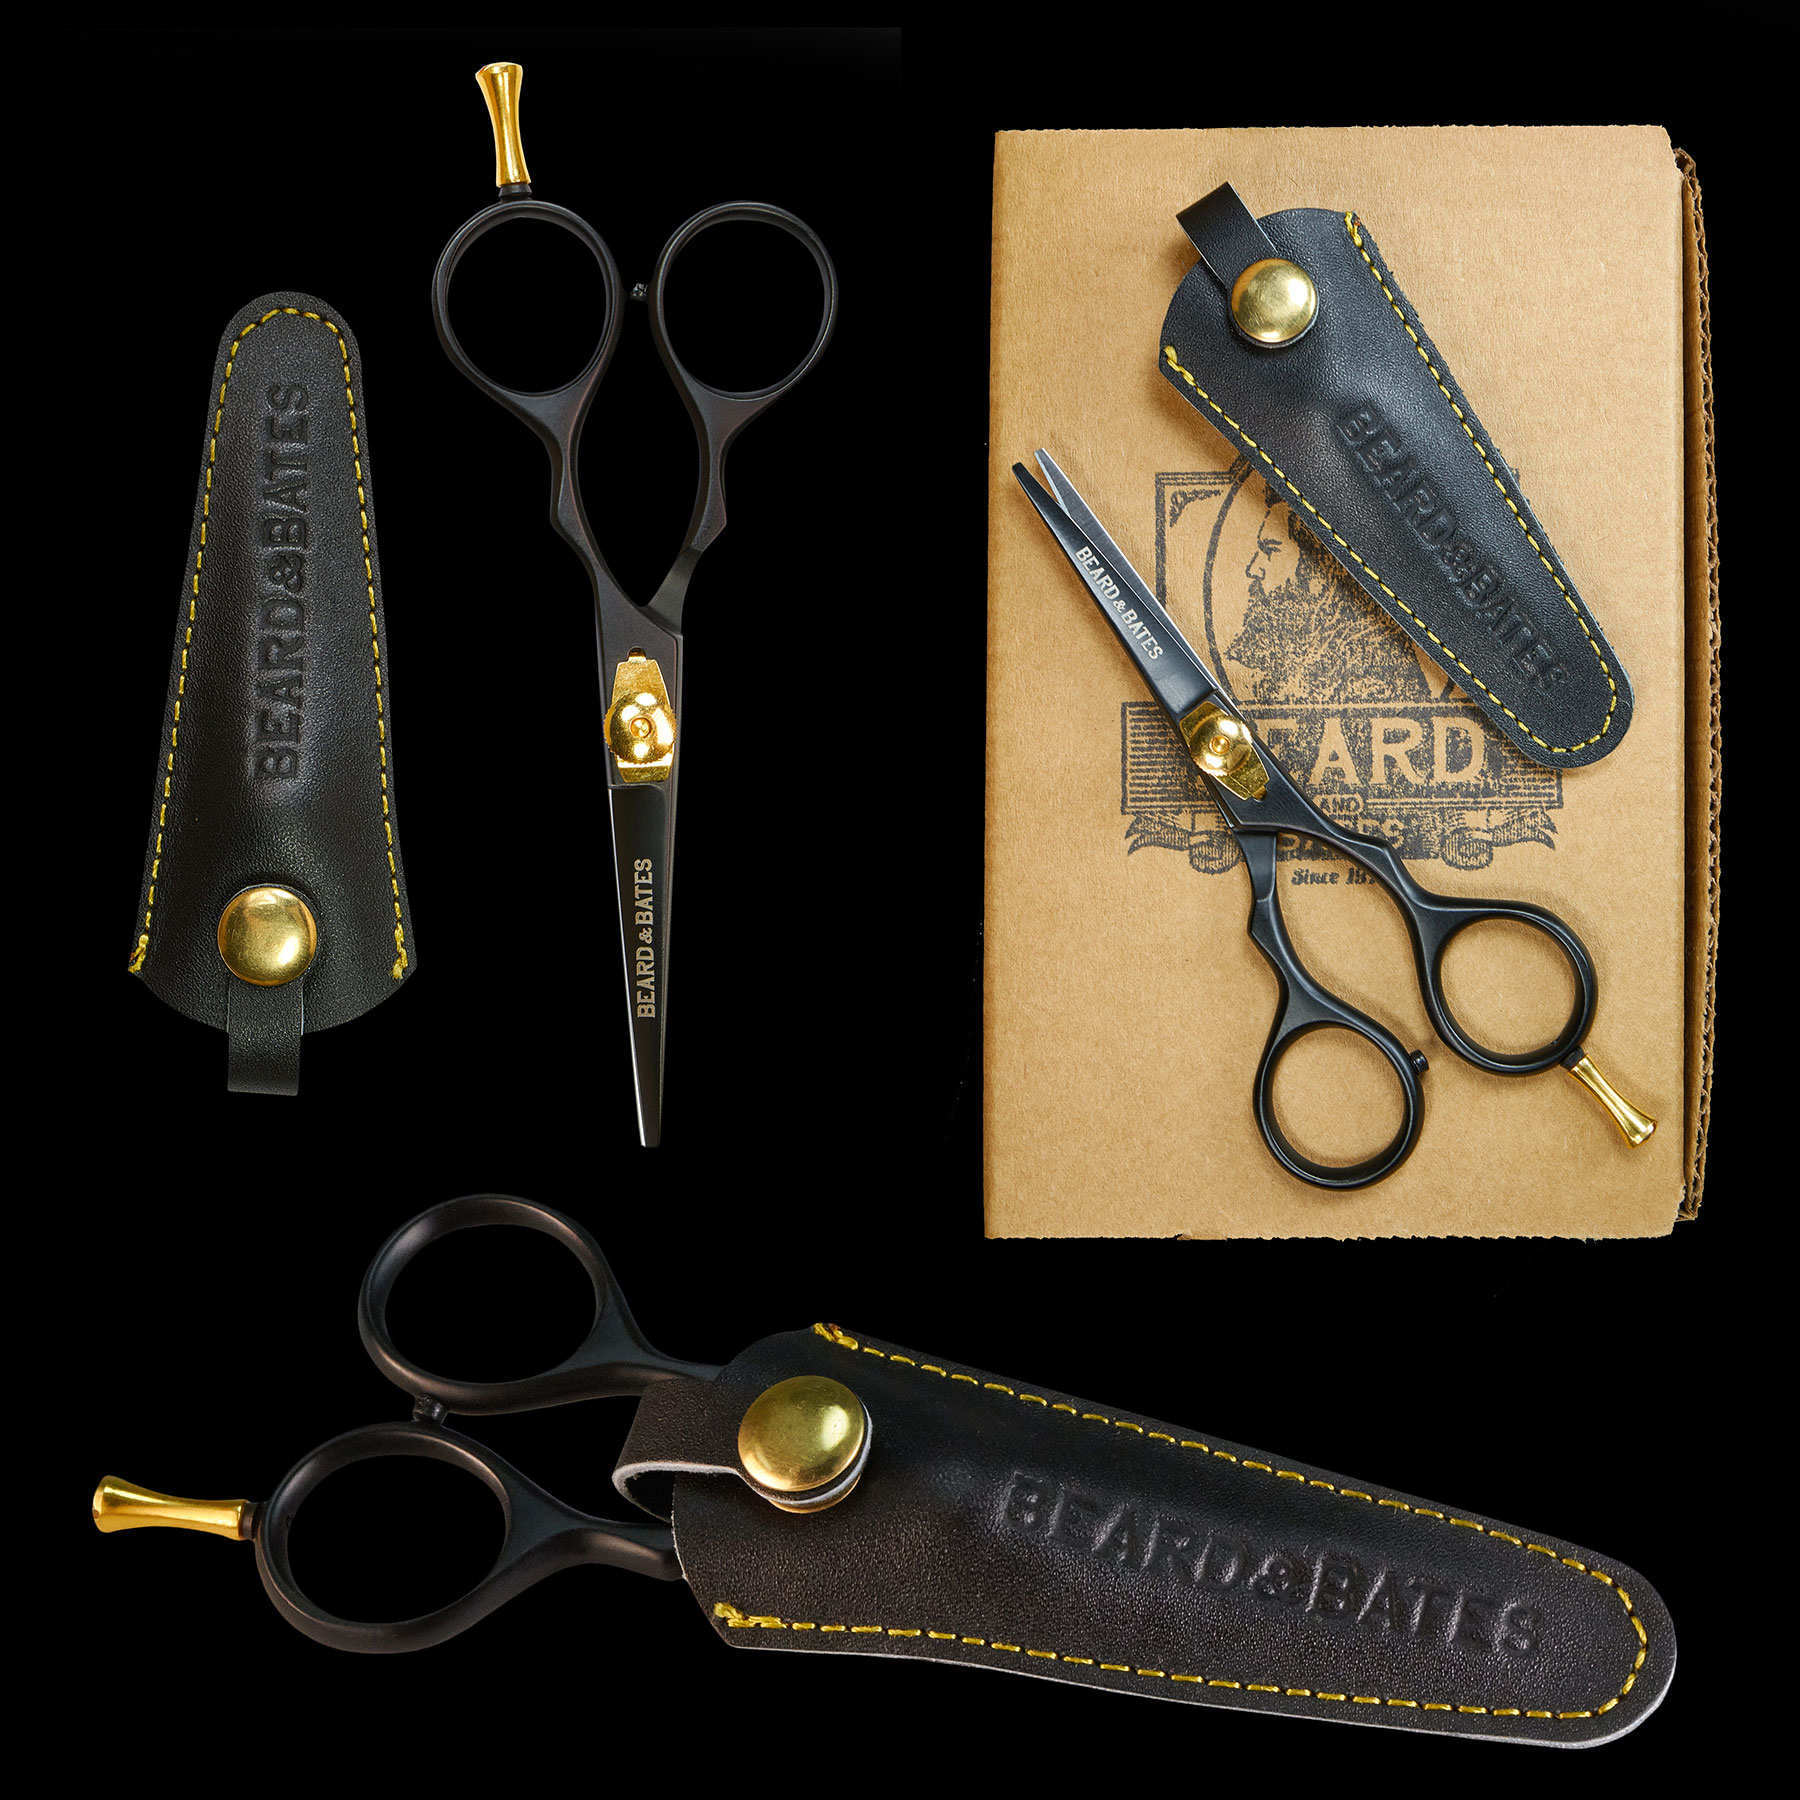 1878 Black Label Shears - Premium Grooming Scissors with Leather